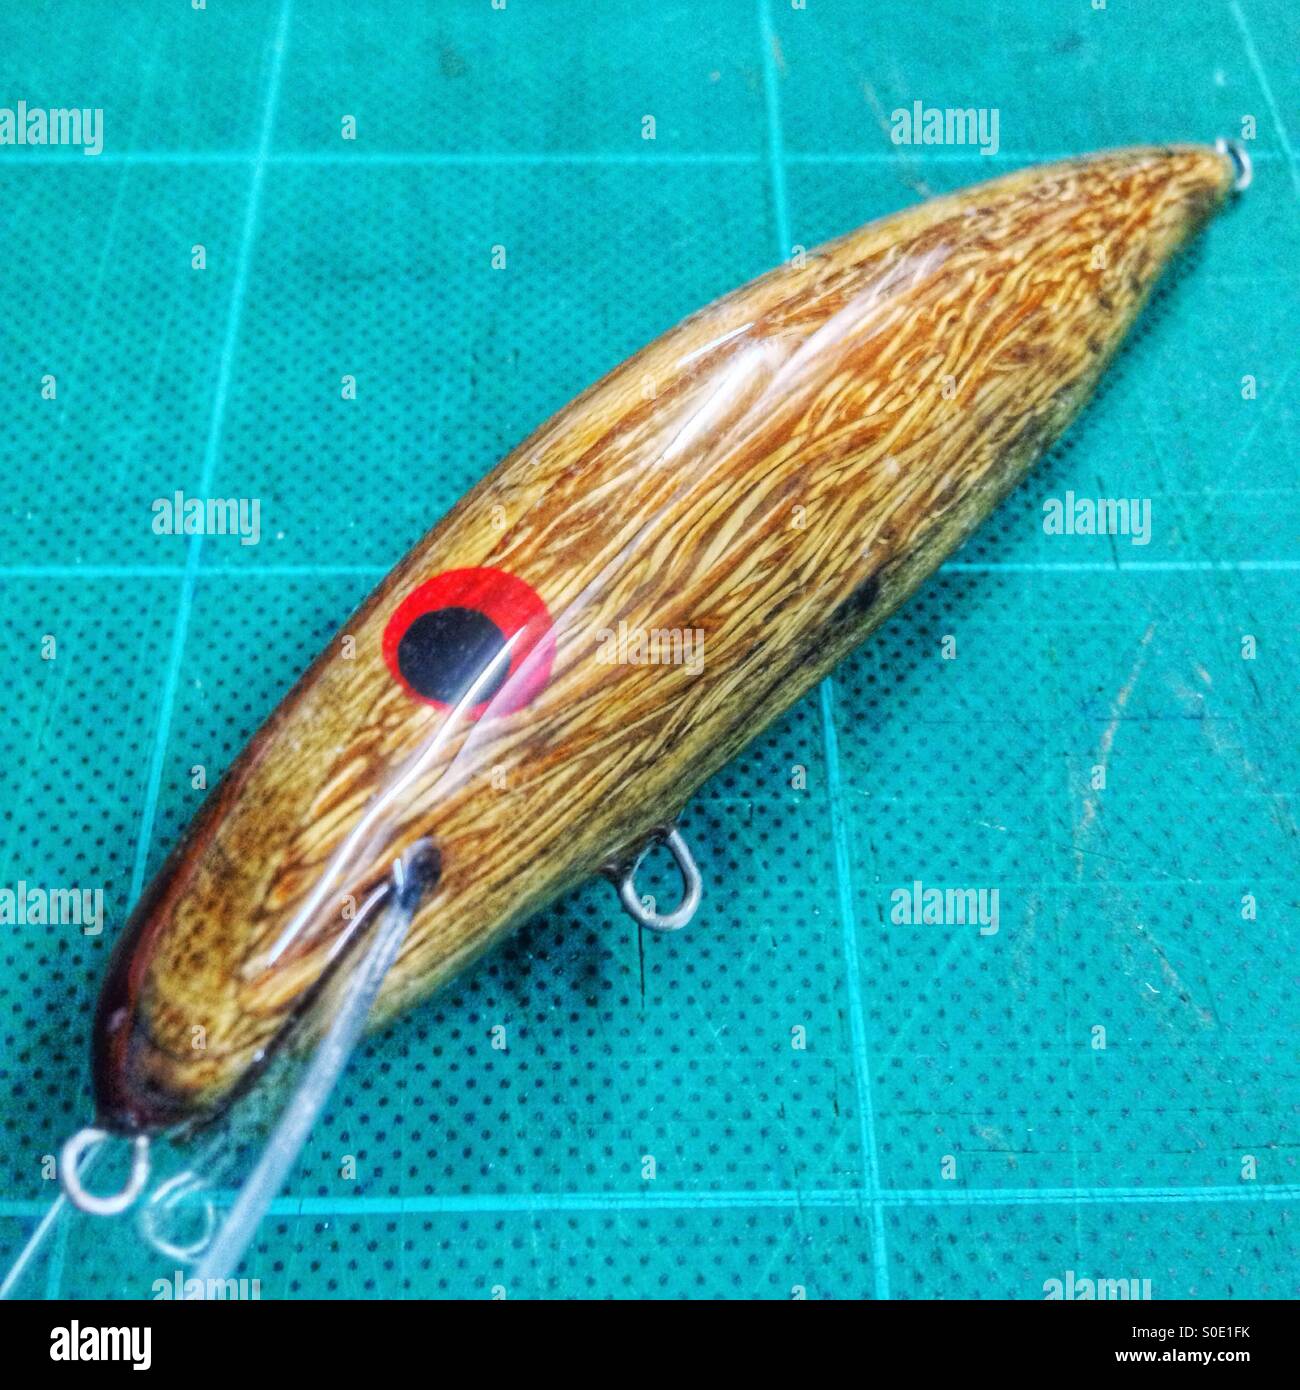 Handmade fishing lure carved from a coconut, in Darwin, Northern